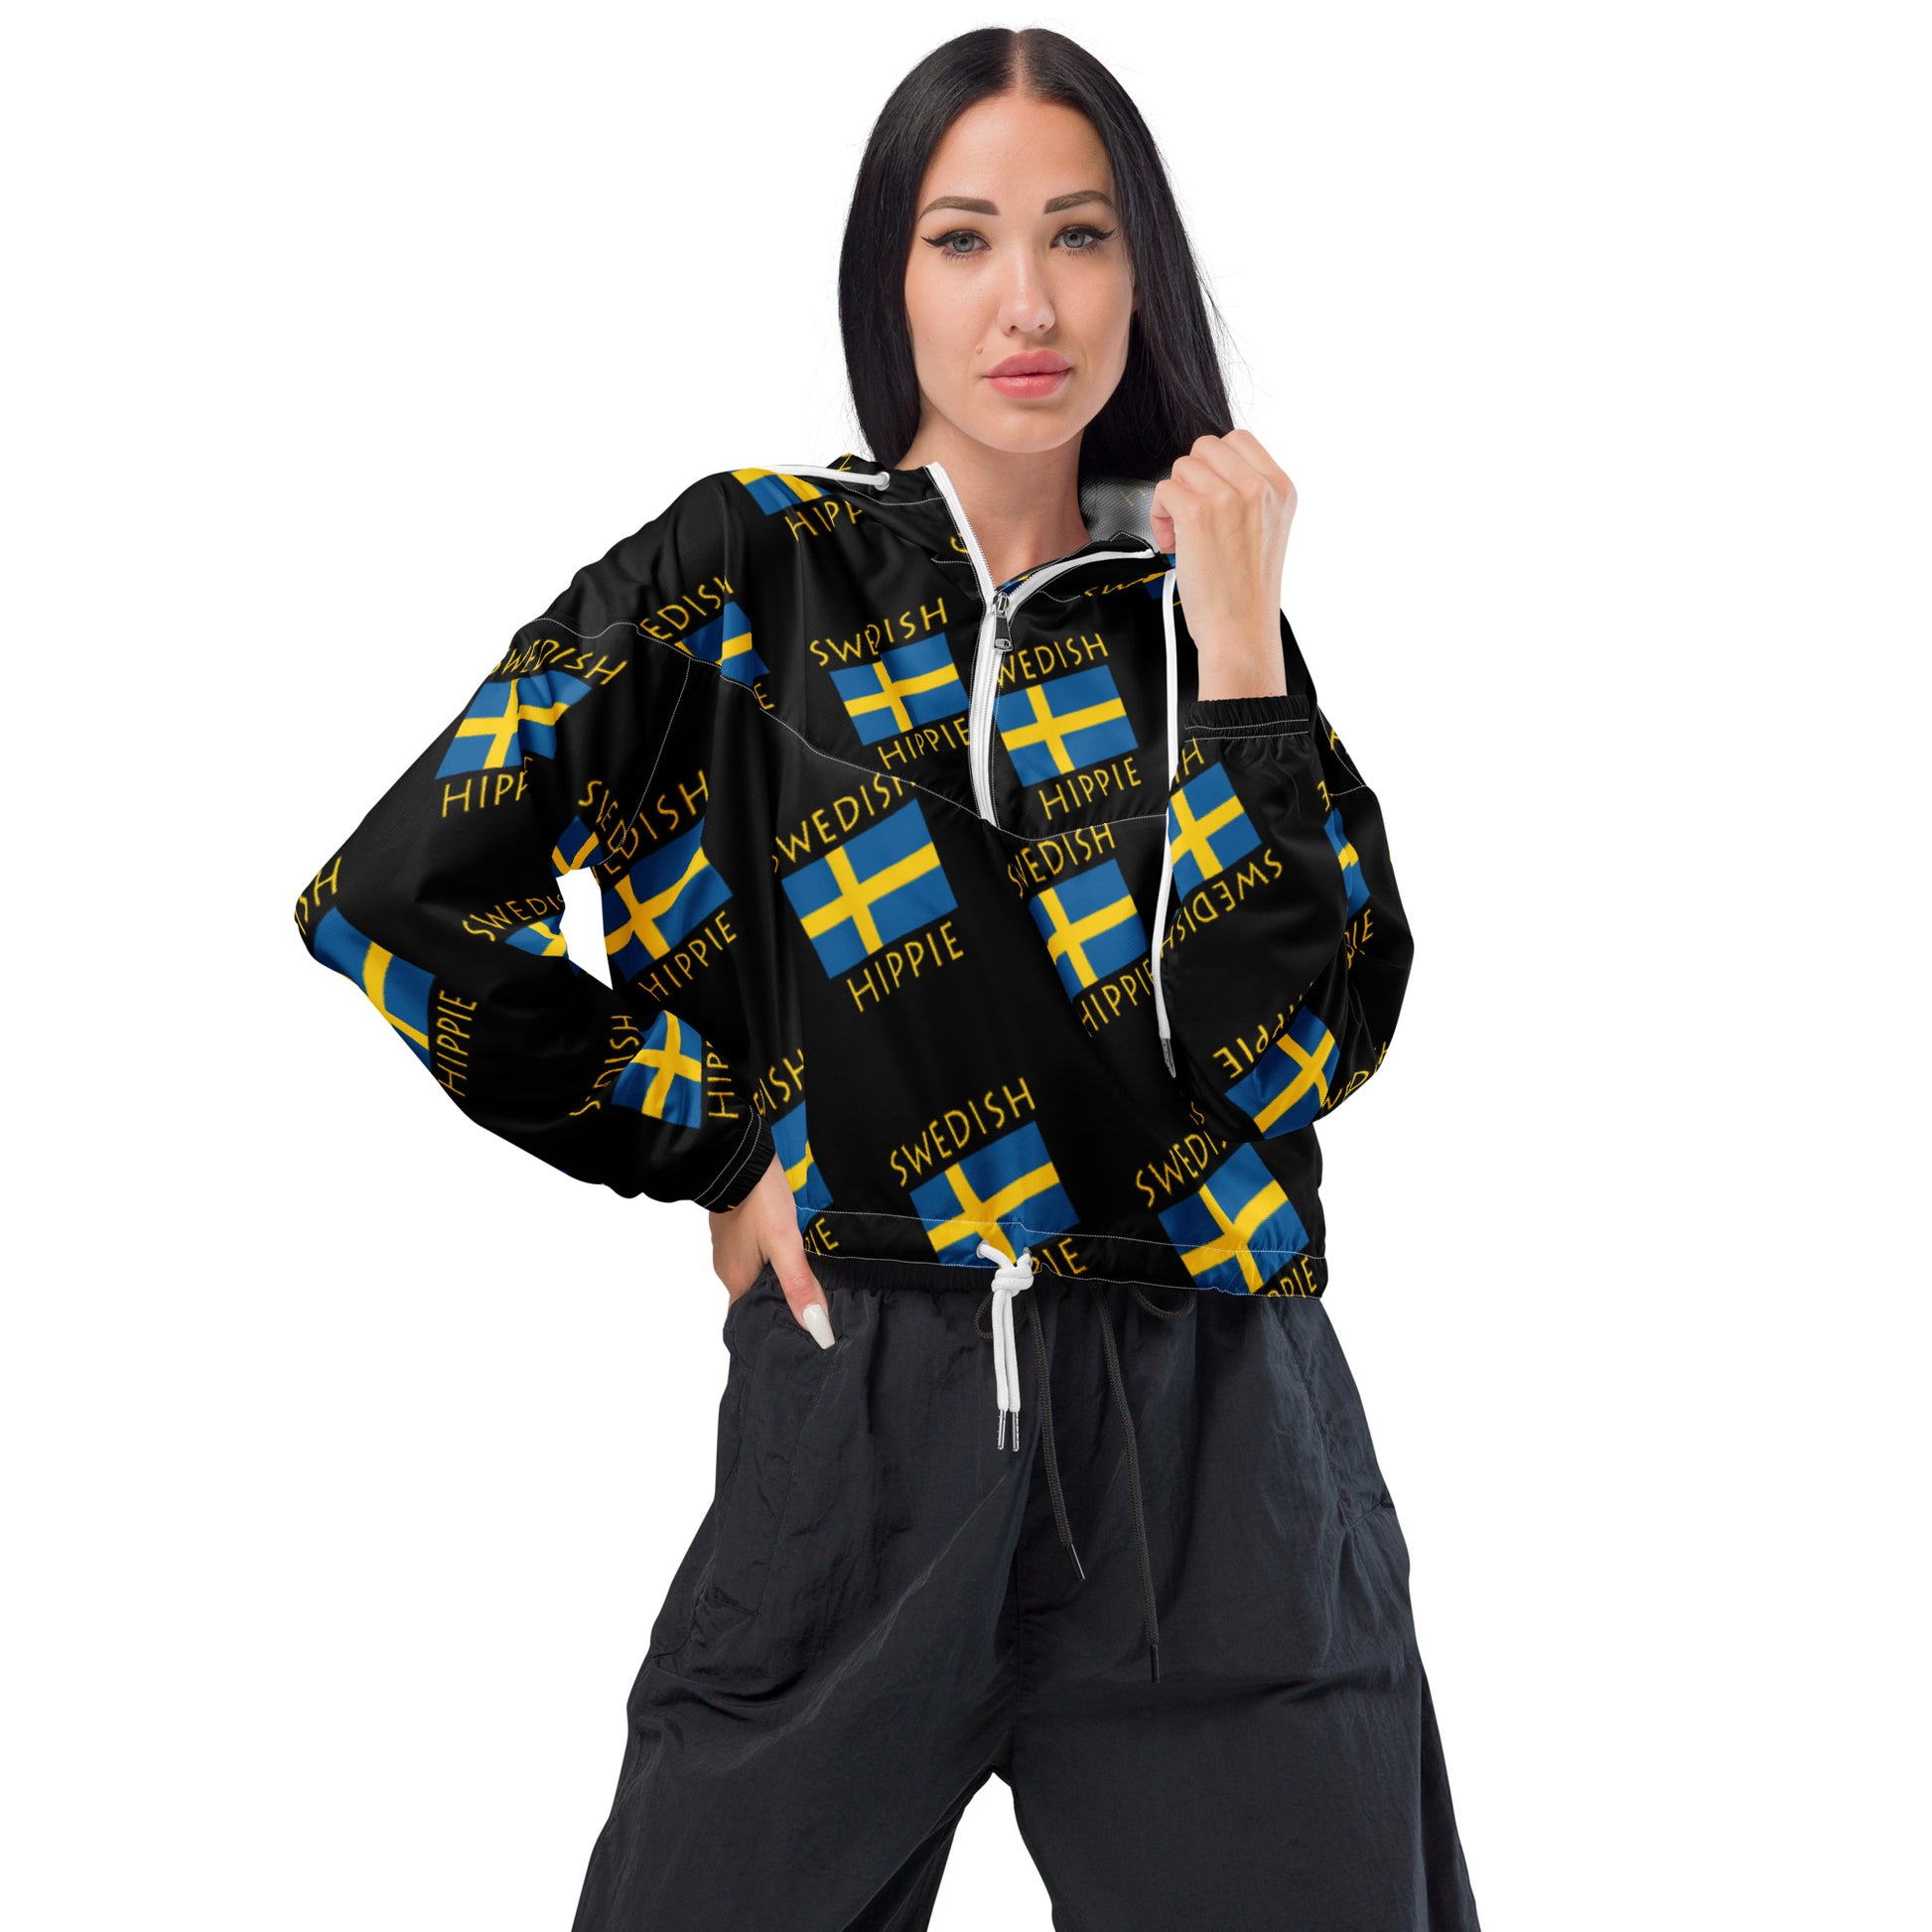 This Swedish Flag Hippie™ stylish cropped half-zip windbreaker is a fashion statement! The repeating Swedish Flag Hippie design is the coolest, hippest, trendiest piece in your wardrobe! Hike in style without the rain getting in the way...this cropped windbreaker is lightweight, waterproof, and suitable for every kind of adventure. Features include side-slit pockets, breathable mesh lining, and adjustable drawstring on the hood and waist to support all your stylish outdoor looks.